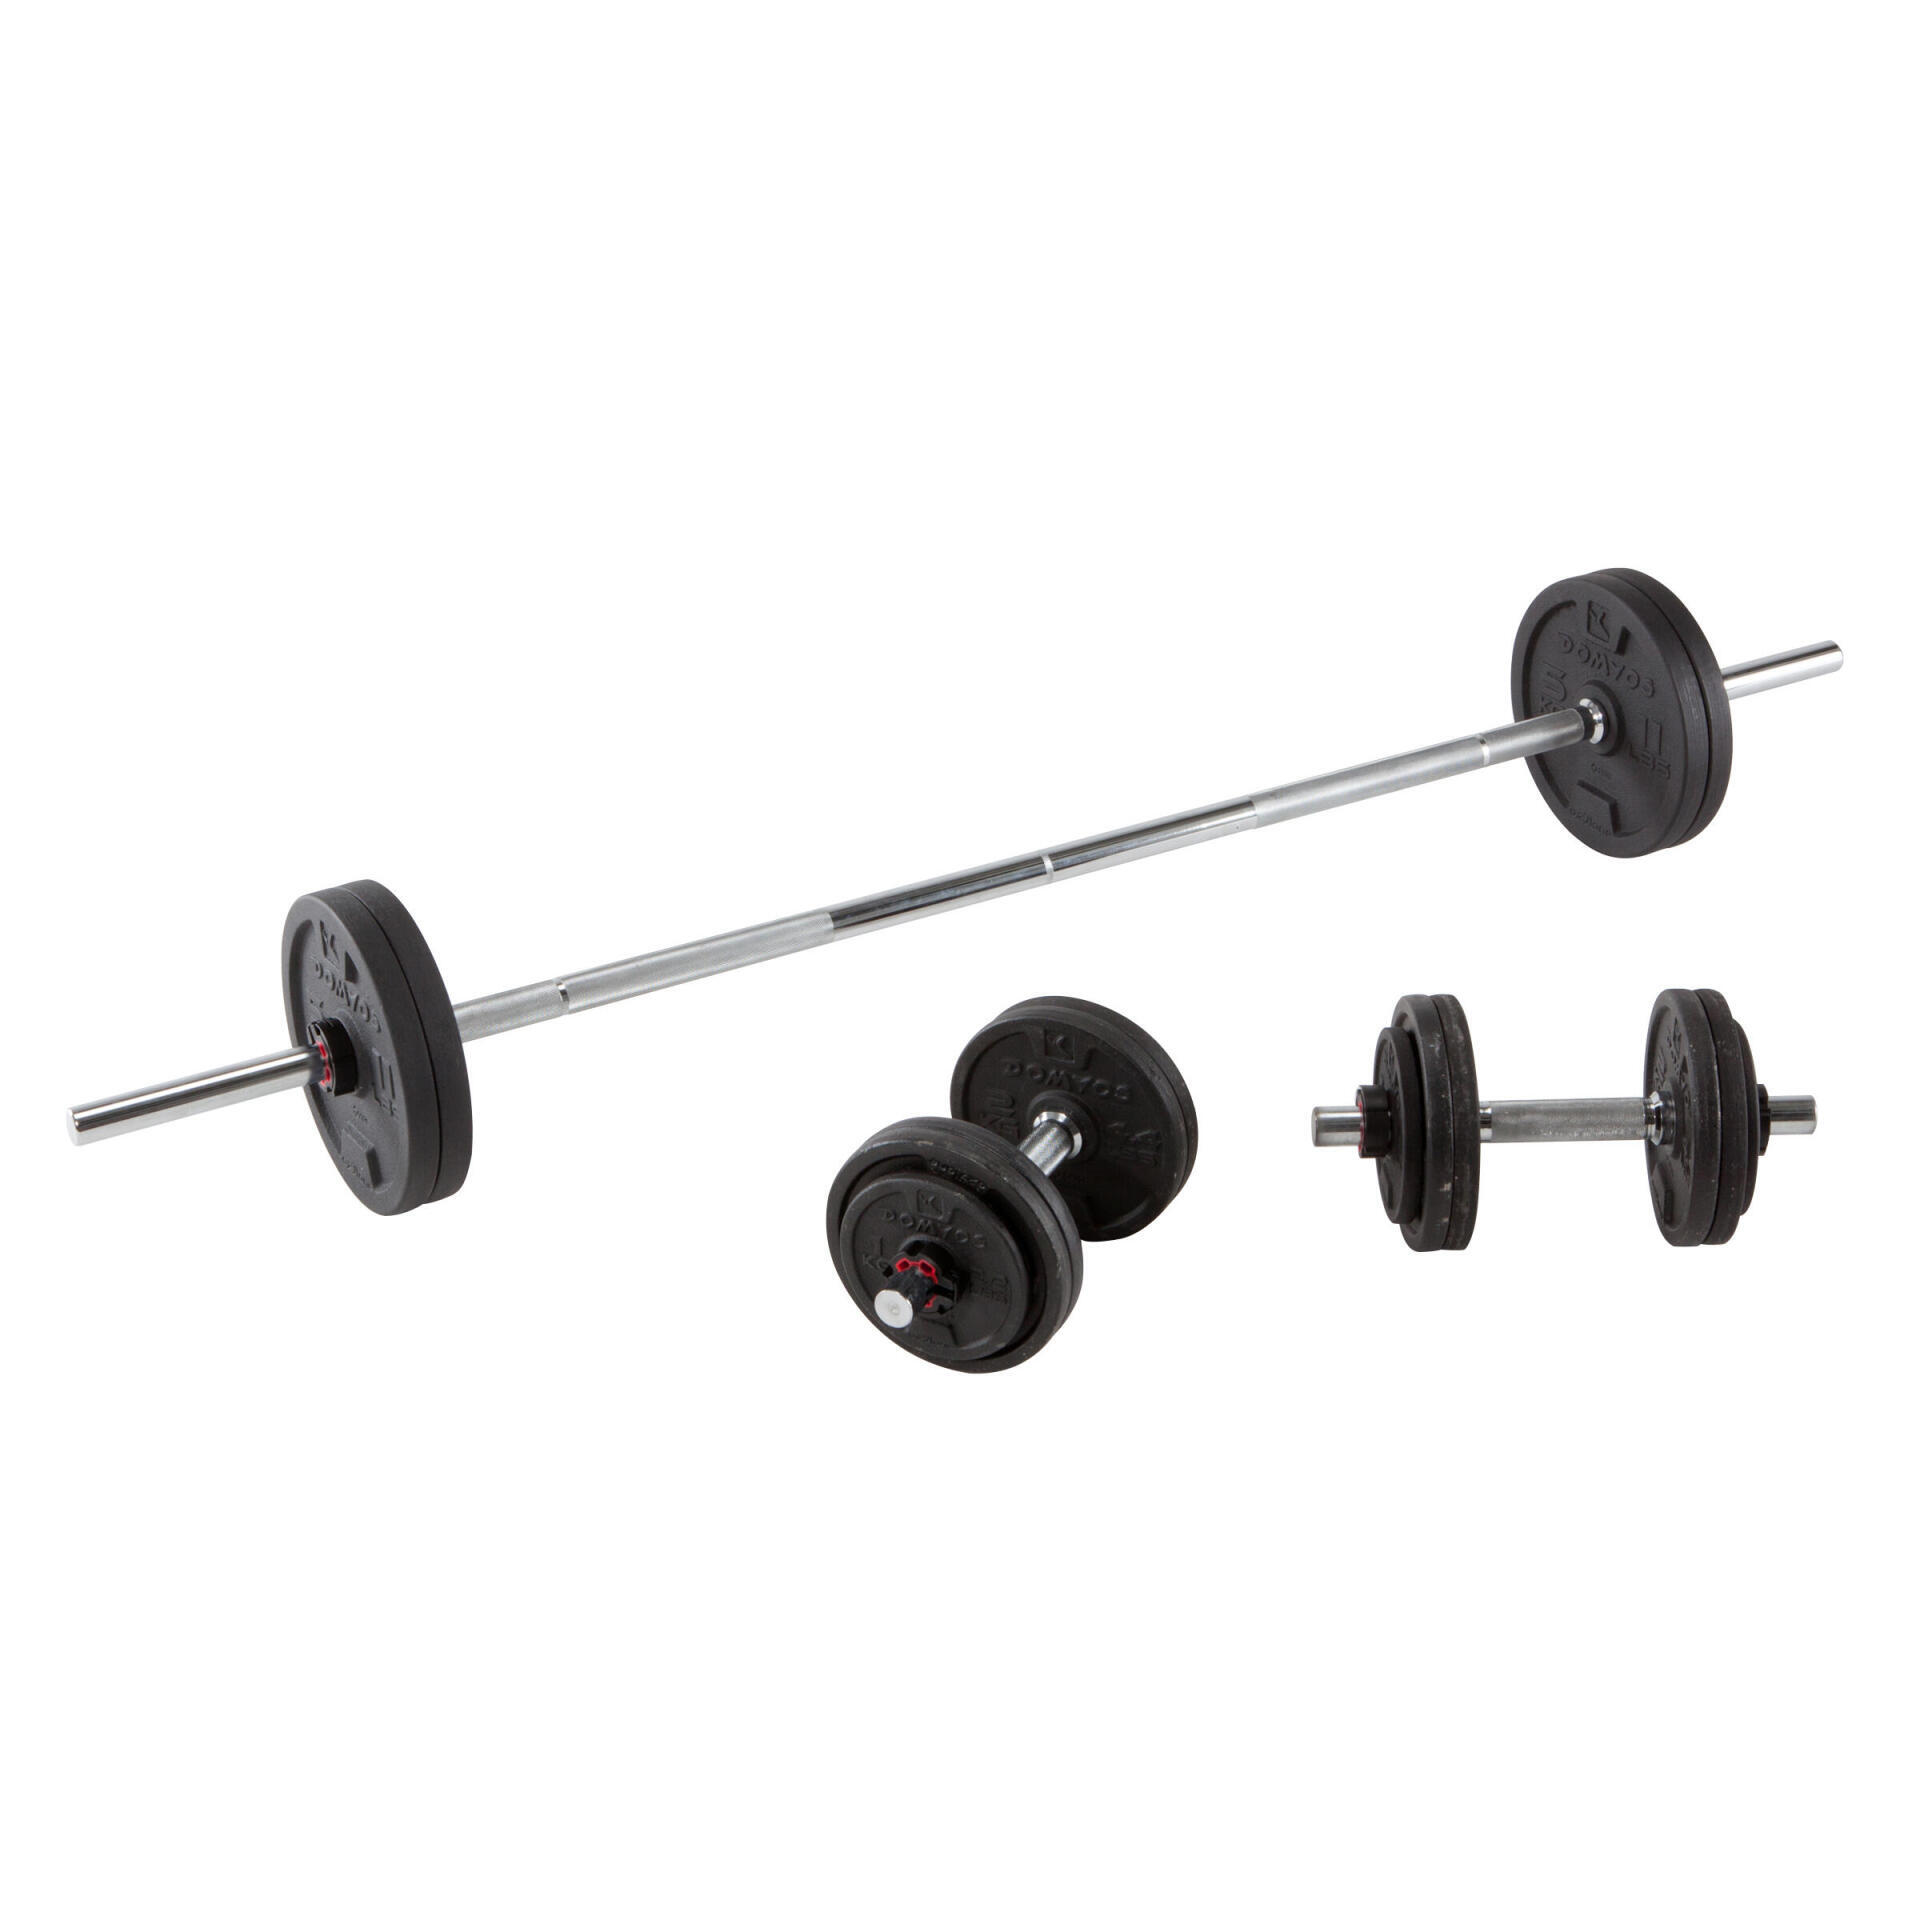 weightlifting kit and bar 50 kg